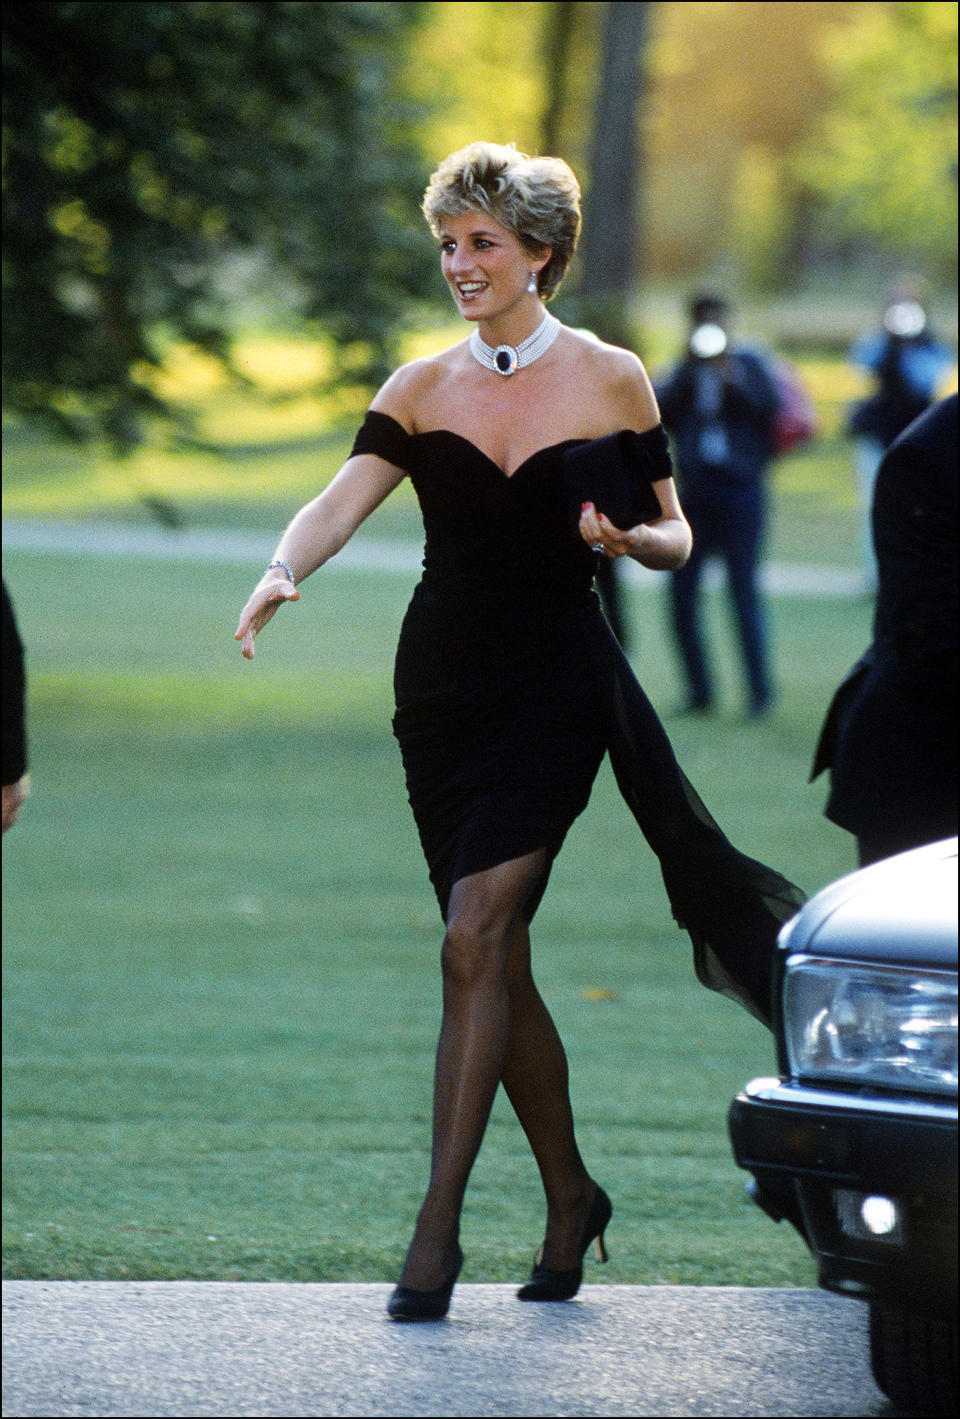 <p>While her wedding dress was undoubtedly headline-worthy, it was the off-the-shoulder dress Princess Diana wore shortly after her divorce that really clocked up attention. She wore the form-fitting black silk cocktail dress to a Vanity Fair party in 1994, the very same evening that Prince Charles publicly confessed to his affair with Camilla Parker-Bowles in the documentary, <em>Charles: The Private Man, The Public Role</em>, and from then on it became known as the 'revenge dress'. The Christina Stambolian gown has recently been attracting attention after Elizabeth Debicki - who plays Diana in season five of <em>The Crown</em> - was photographed wearing a replica of the famous number on set, reportedly prompting a 400% spike in online searches for 'revenge dress', as revealed by <a href="https://designbundles.net/" rel="nofollow noopener" target="_blank" data-ylk="slk:Design Bundles" class="link ">Design Bundles</a>. (WireImage)</p> 